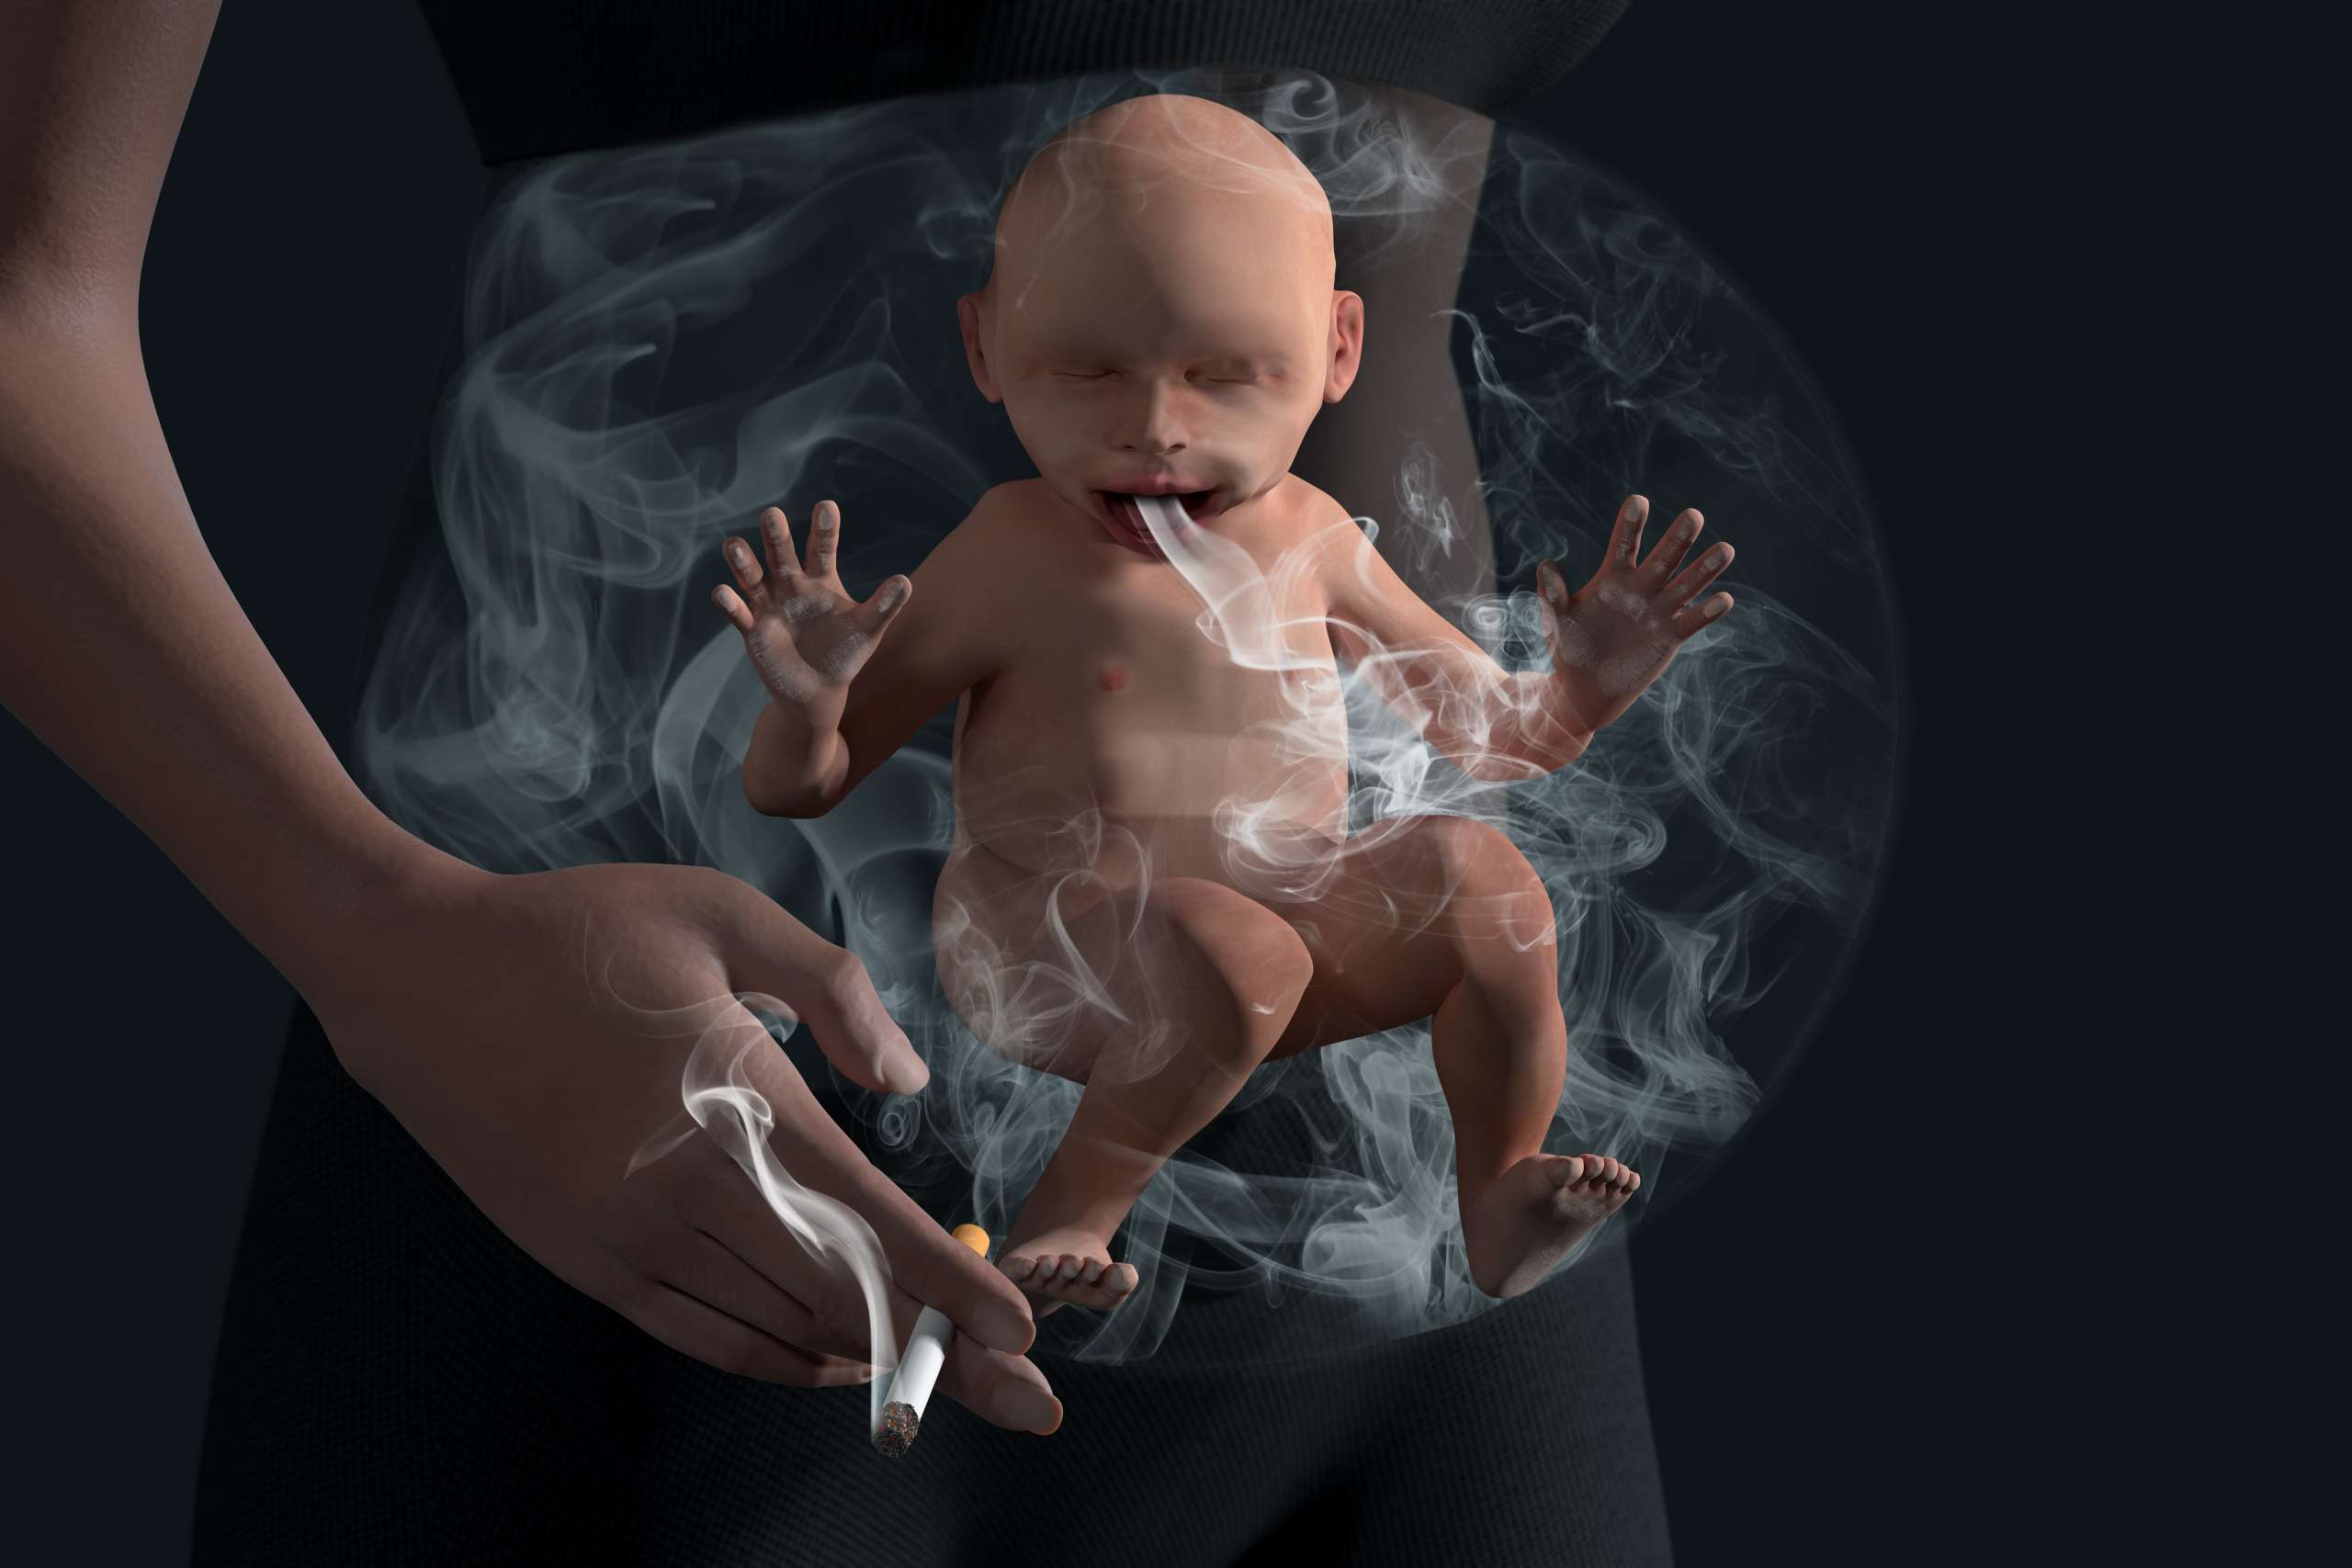 Smoking baby in baby bump. Unborn baby in baby bump smokes passively